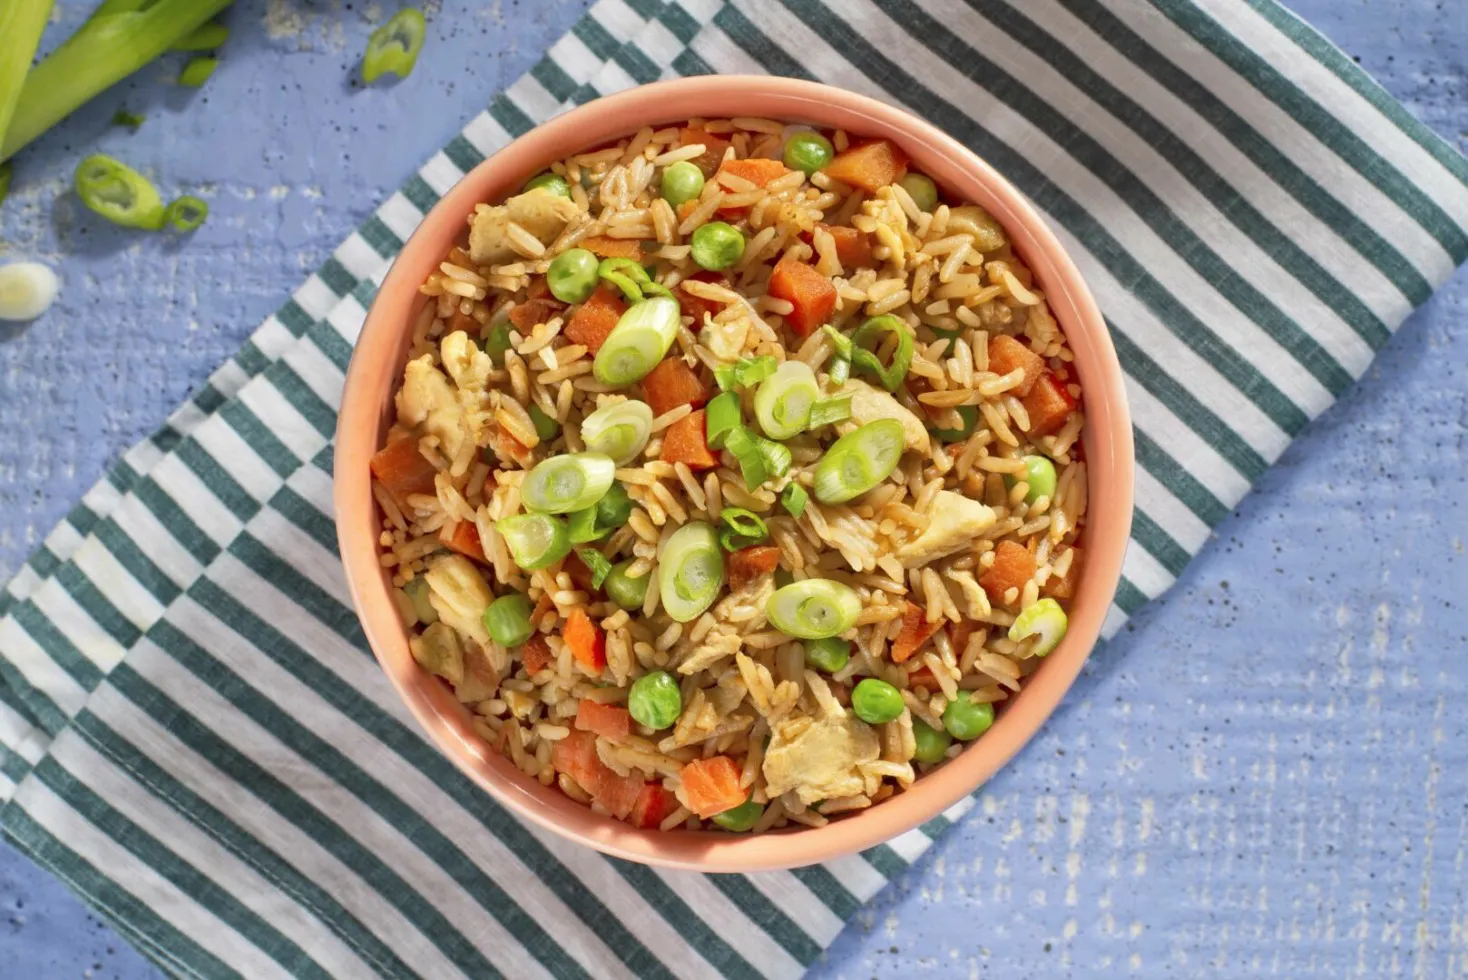 https://www.minuterice.ca/wp-content/uploads/2023/01/Microwave-Fried-Rice-053_V3-1468x980.jpg.webp